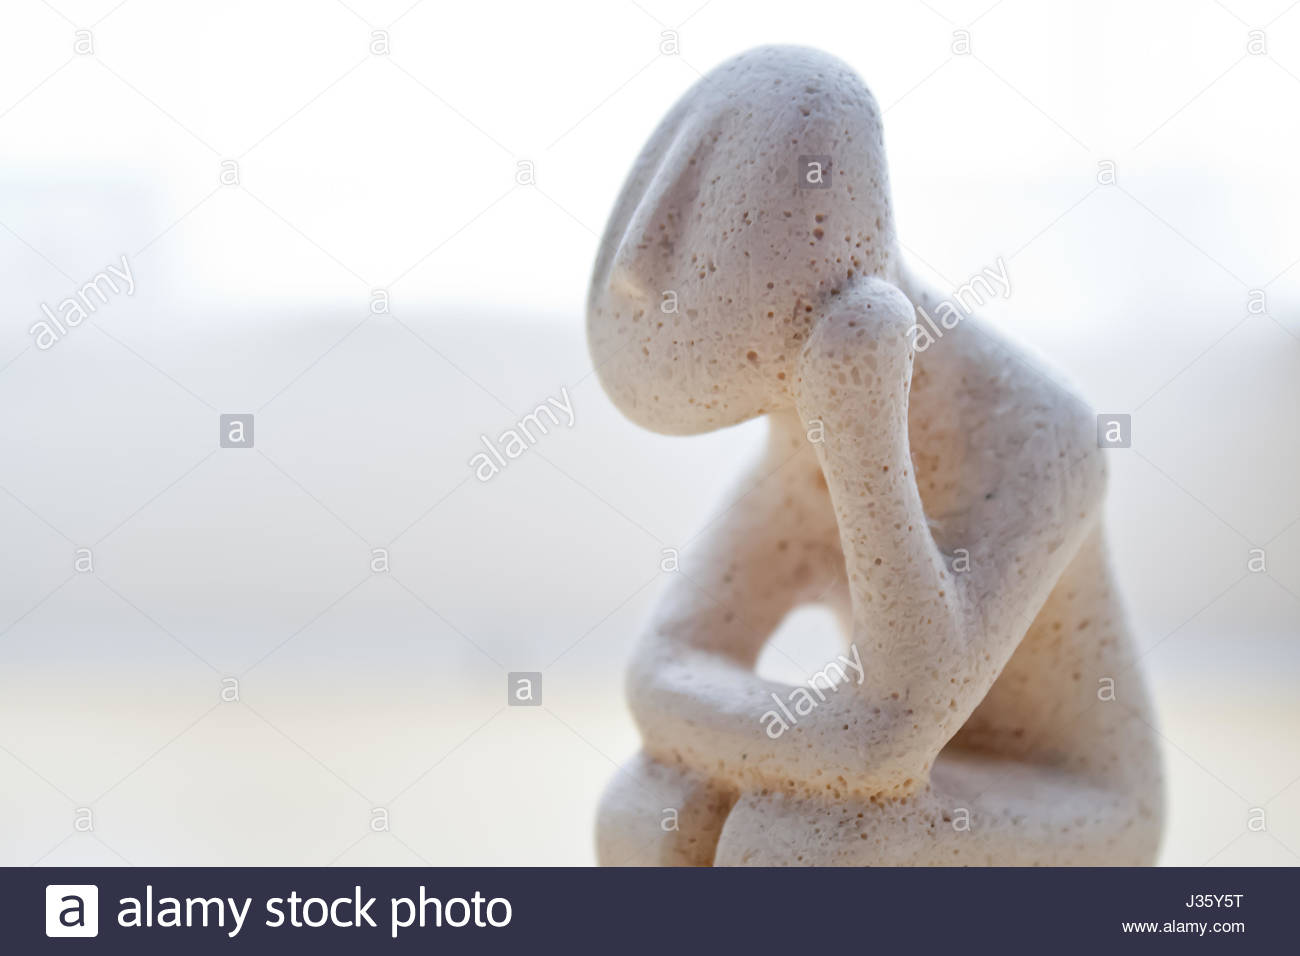 Small Statue Of Stone Man Thinking Pause For Thought Light Stock